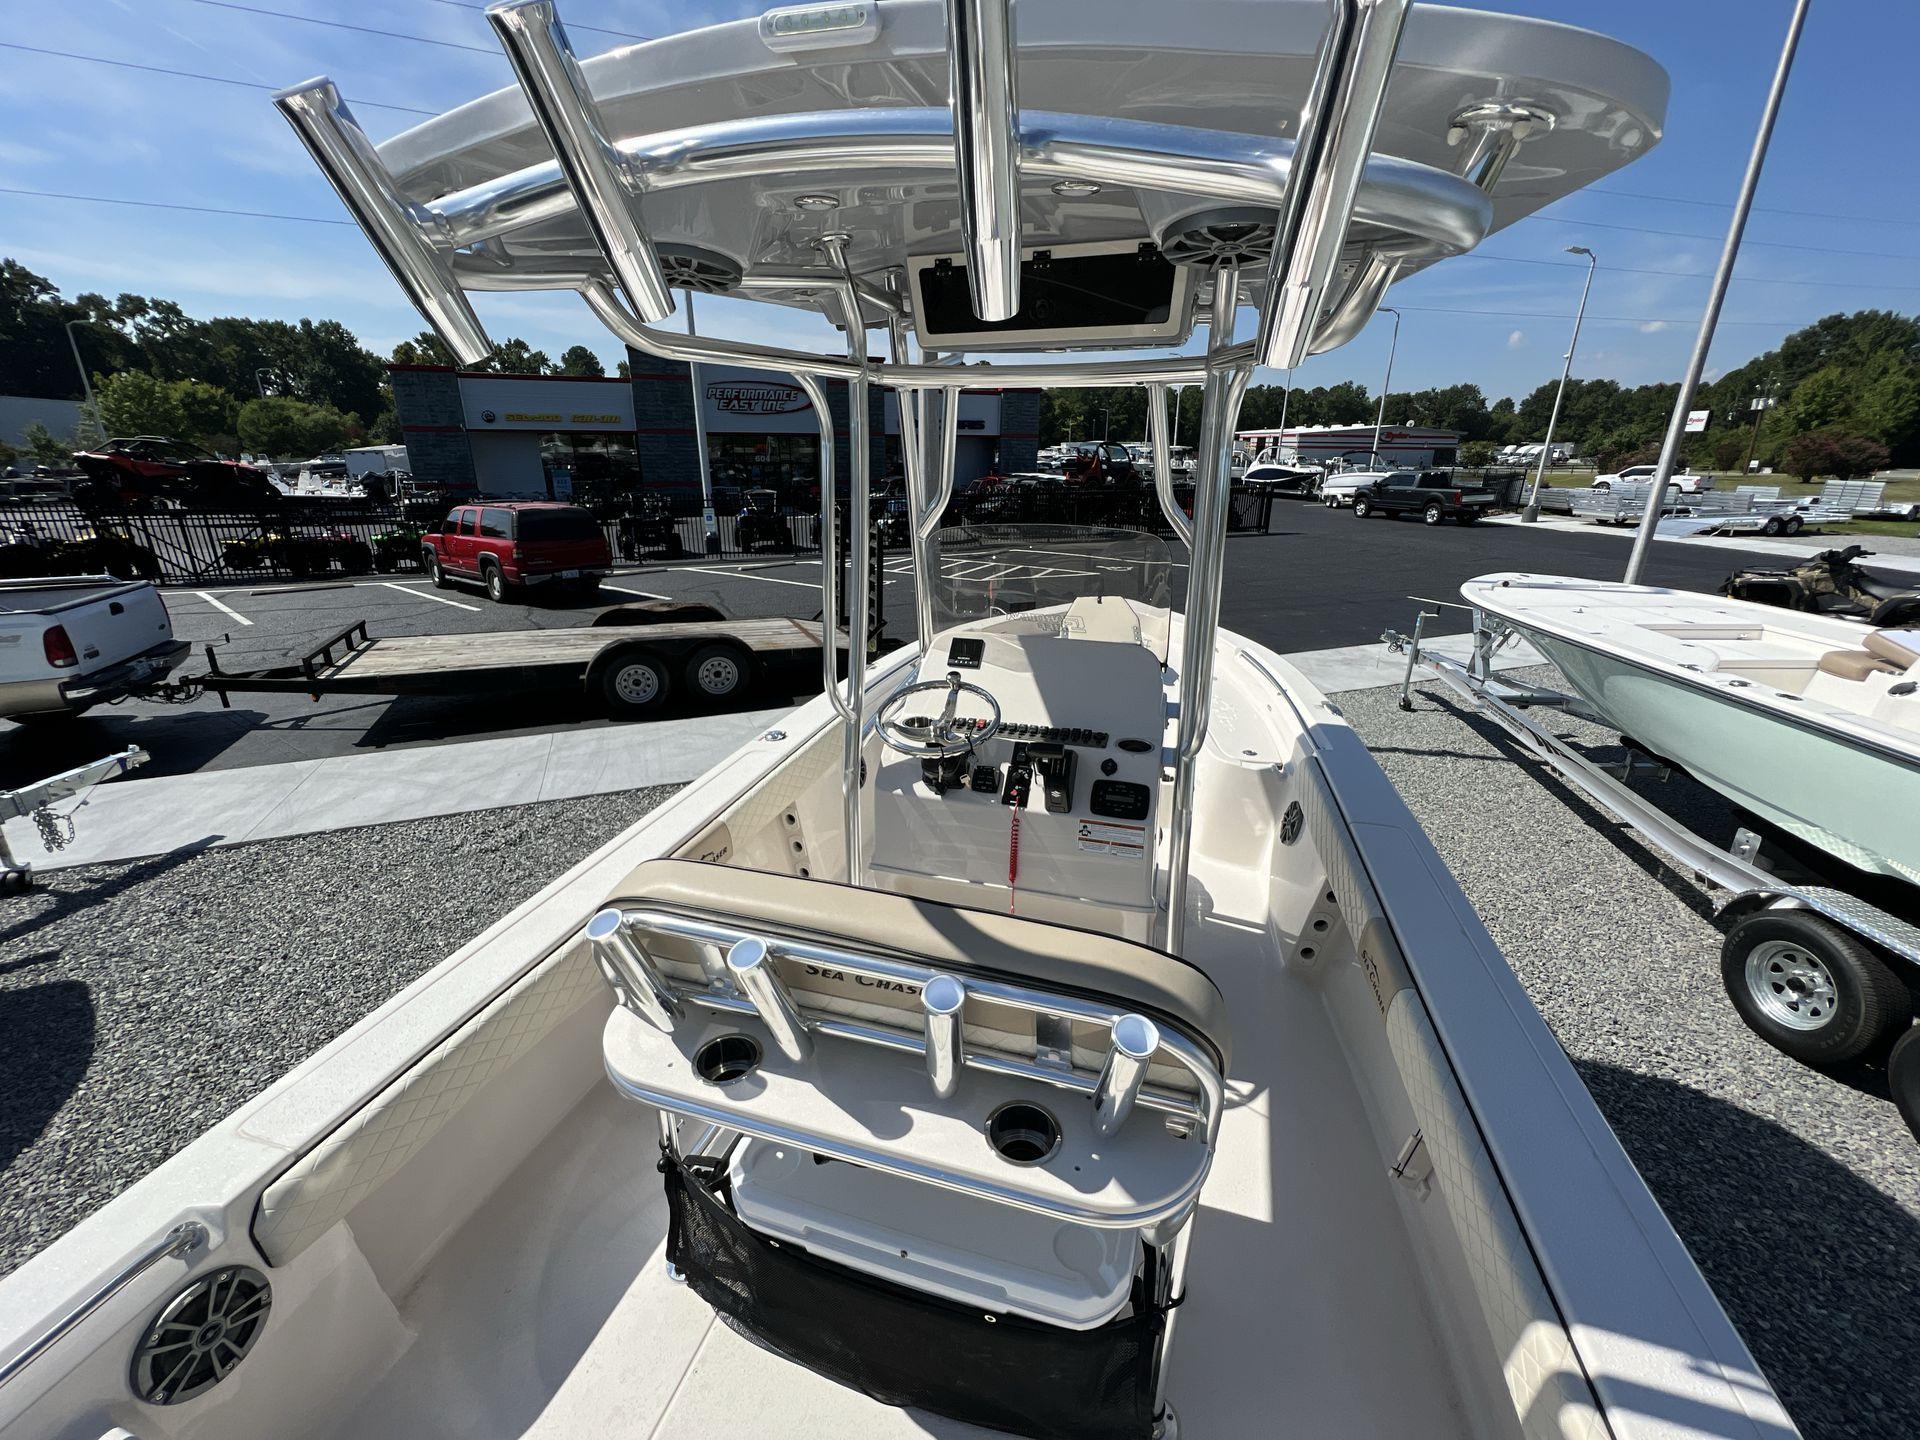 2022 Sea Chaser 23 LX